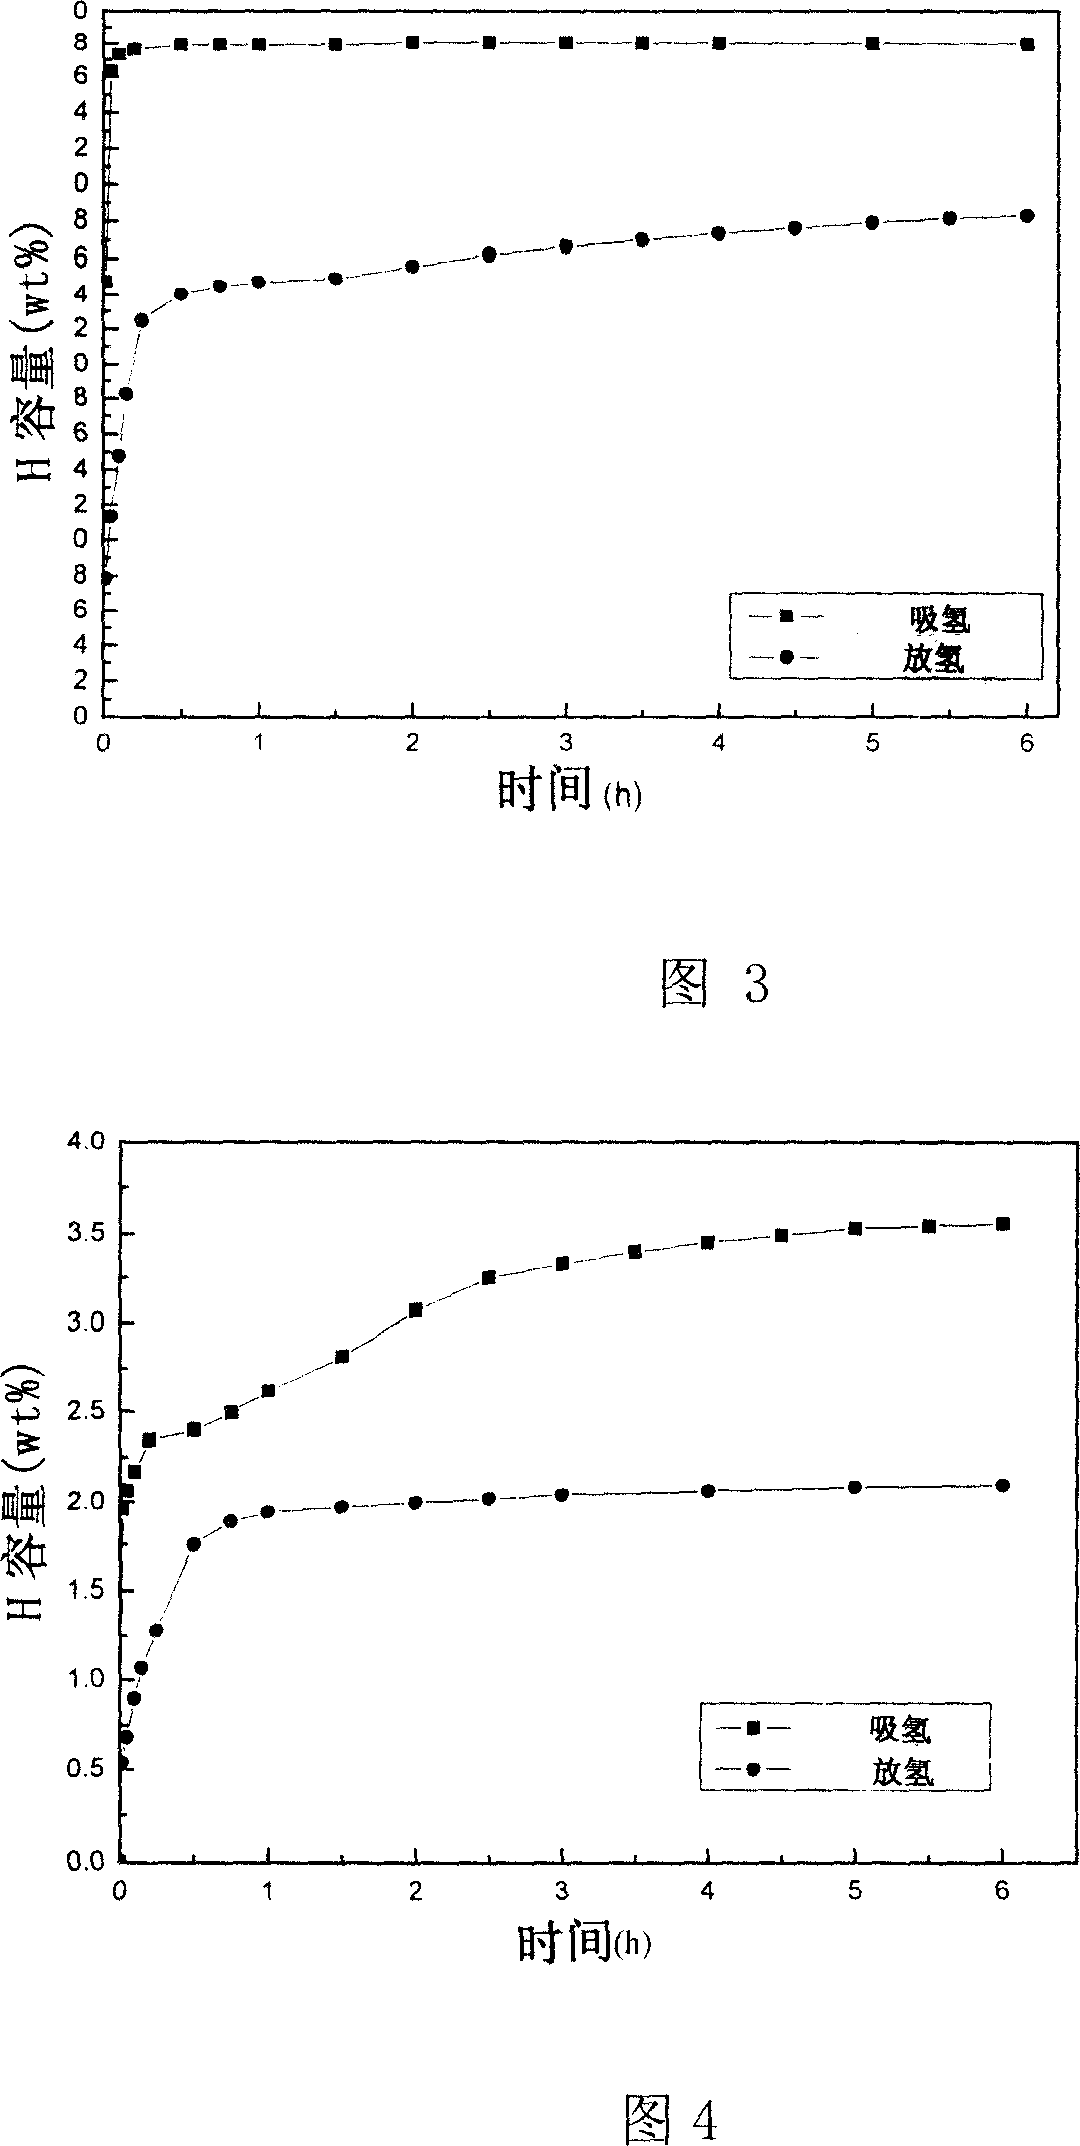 Coordination hydride catalyzed reversible hydrogen storage materials and method of preparing the same